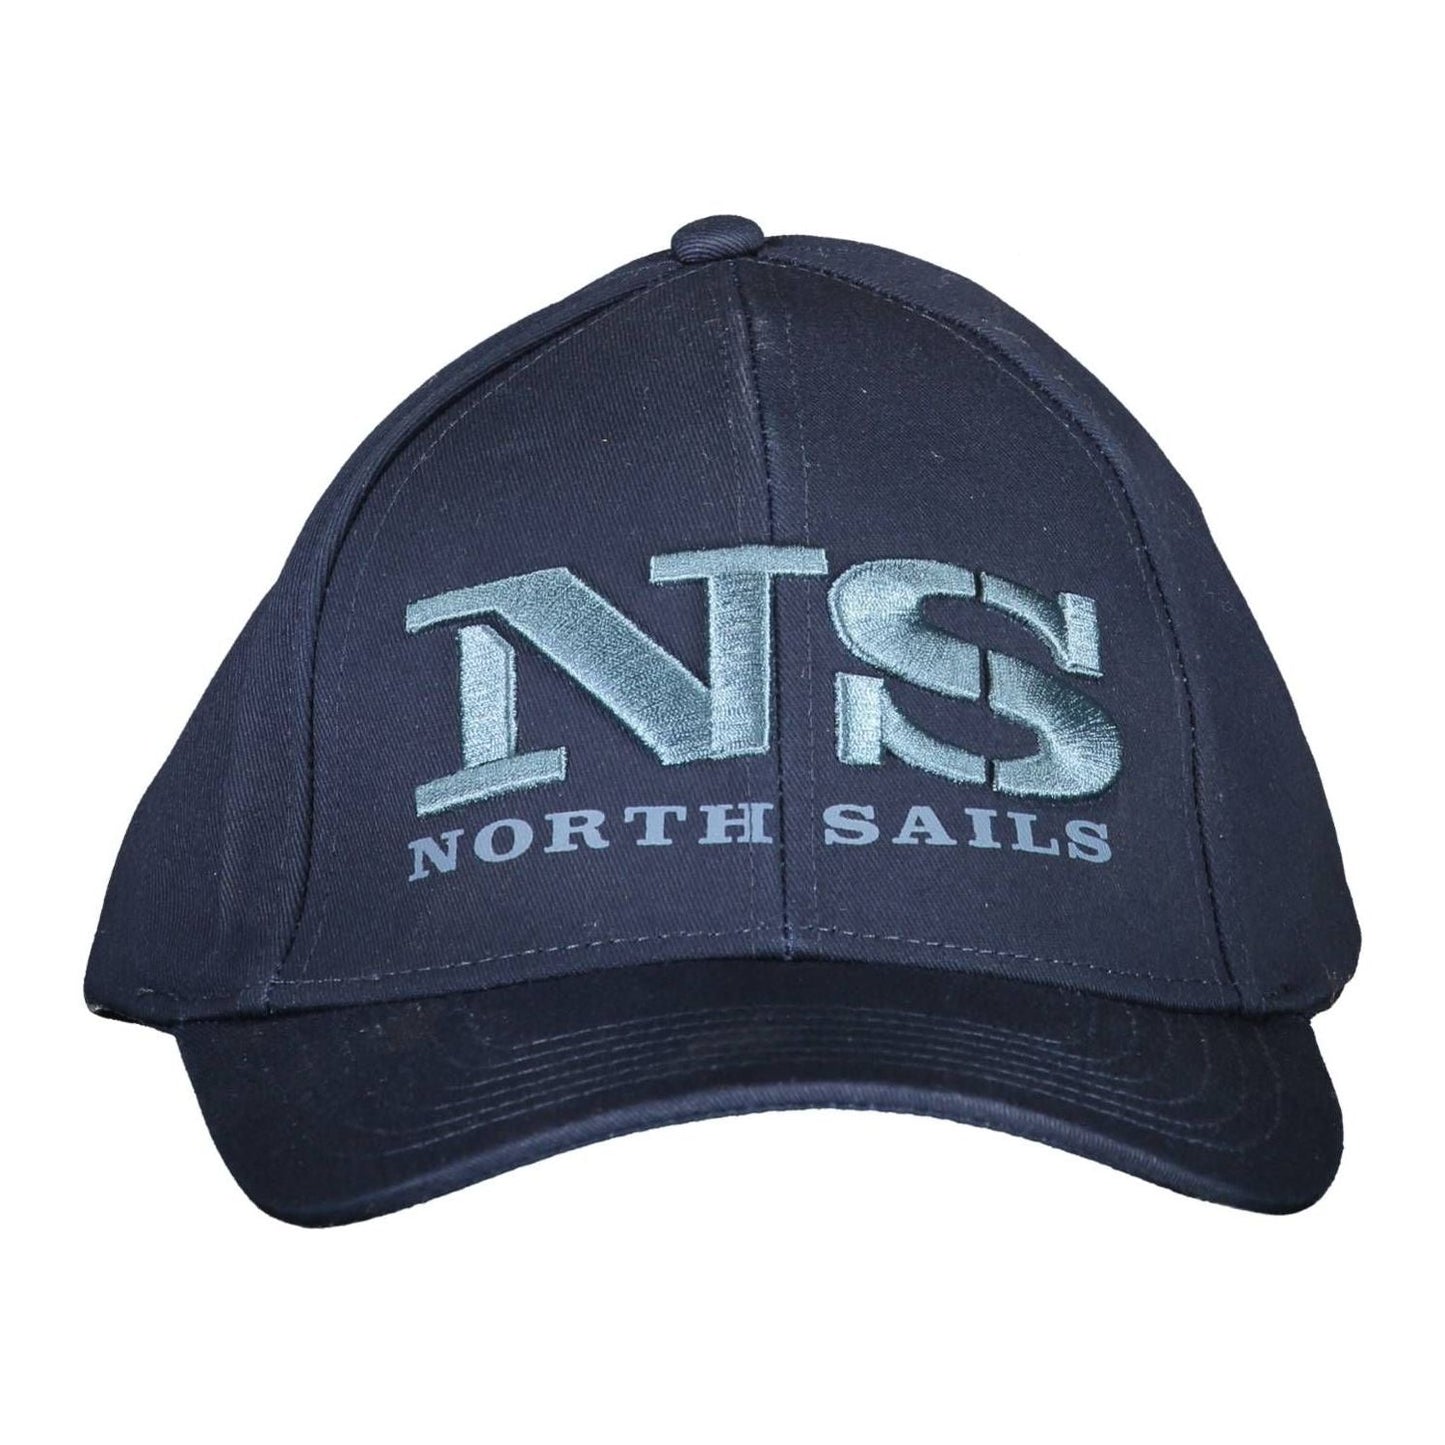 North Sails Chic Blue Embroidered Cotton Cap chic-blue-embroidered-cotton-cap